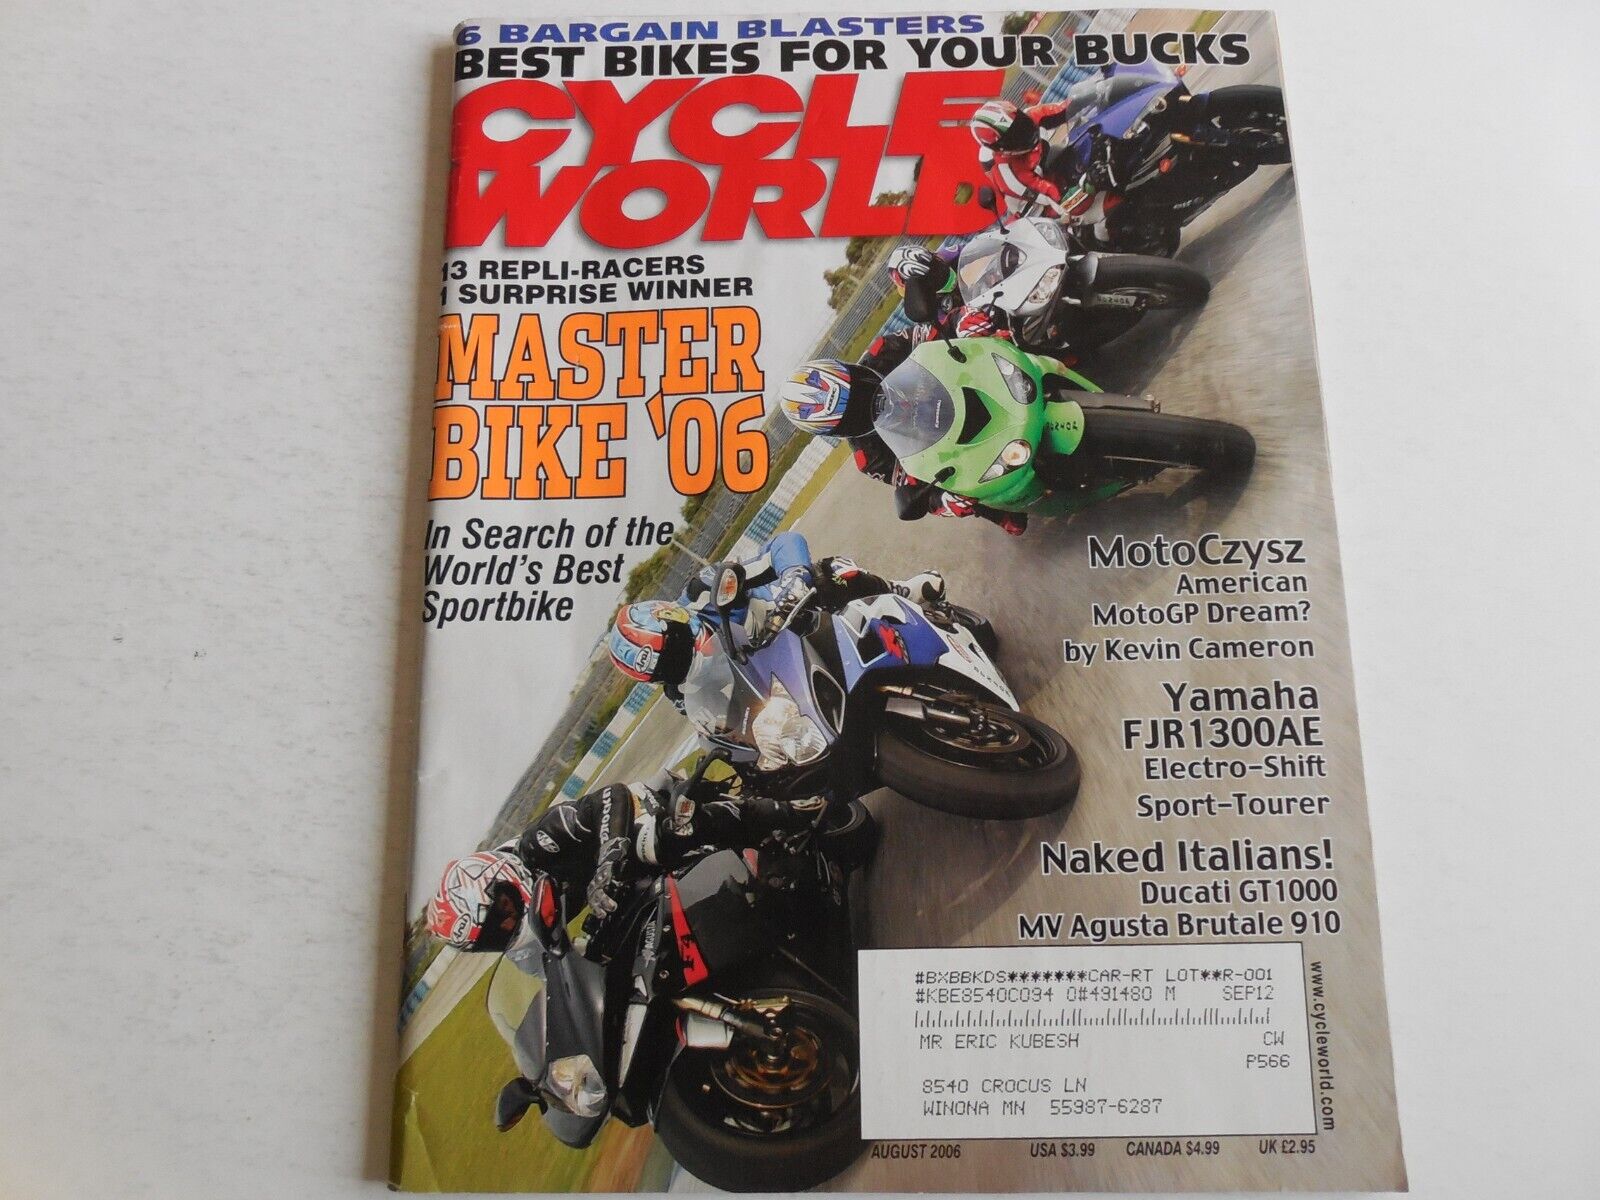 Cycle World August 2006 issue Ducati GT1000, Yamaha FJR1300AE, Master Bike test